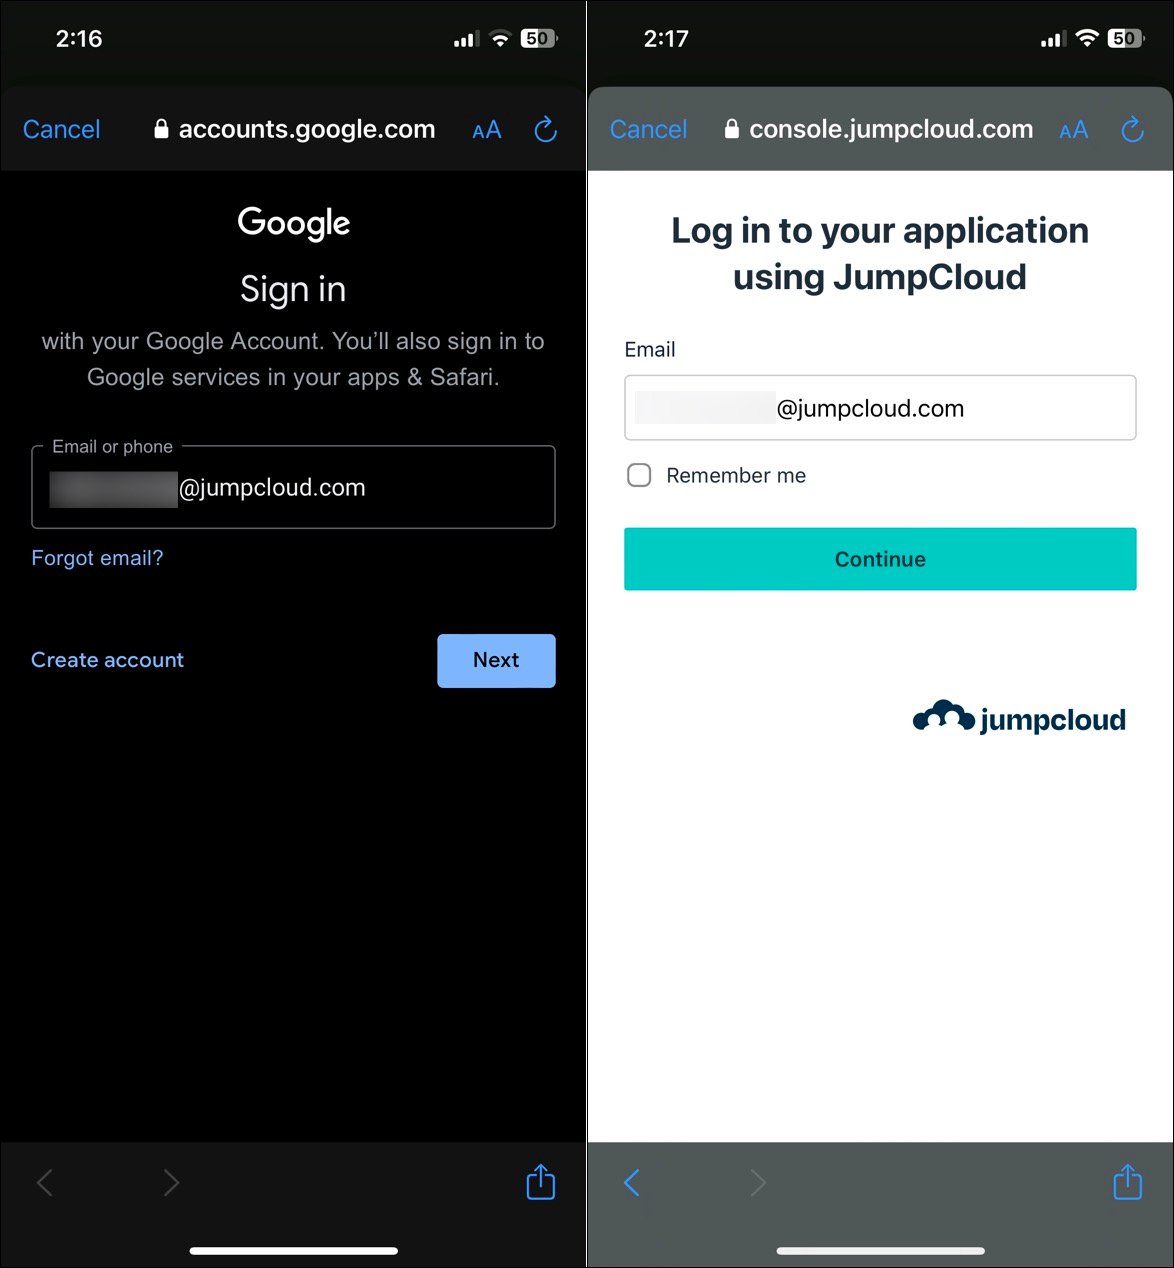 Redirected to JumpCloud SSO to sign in to Google Workspace application on mobile (iOS).